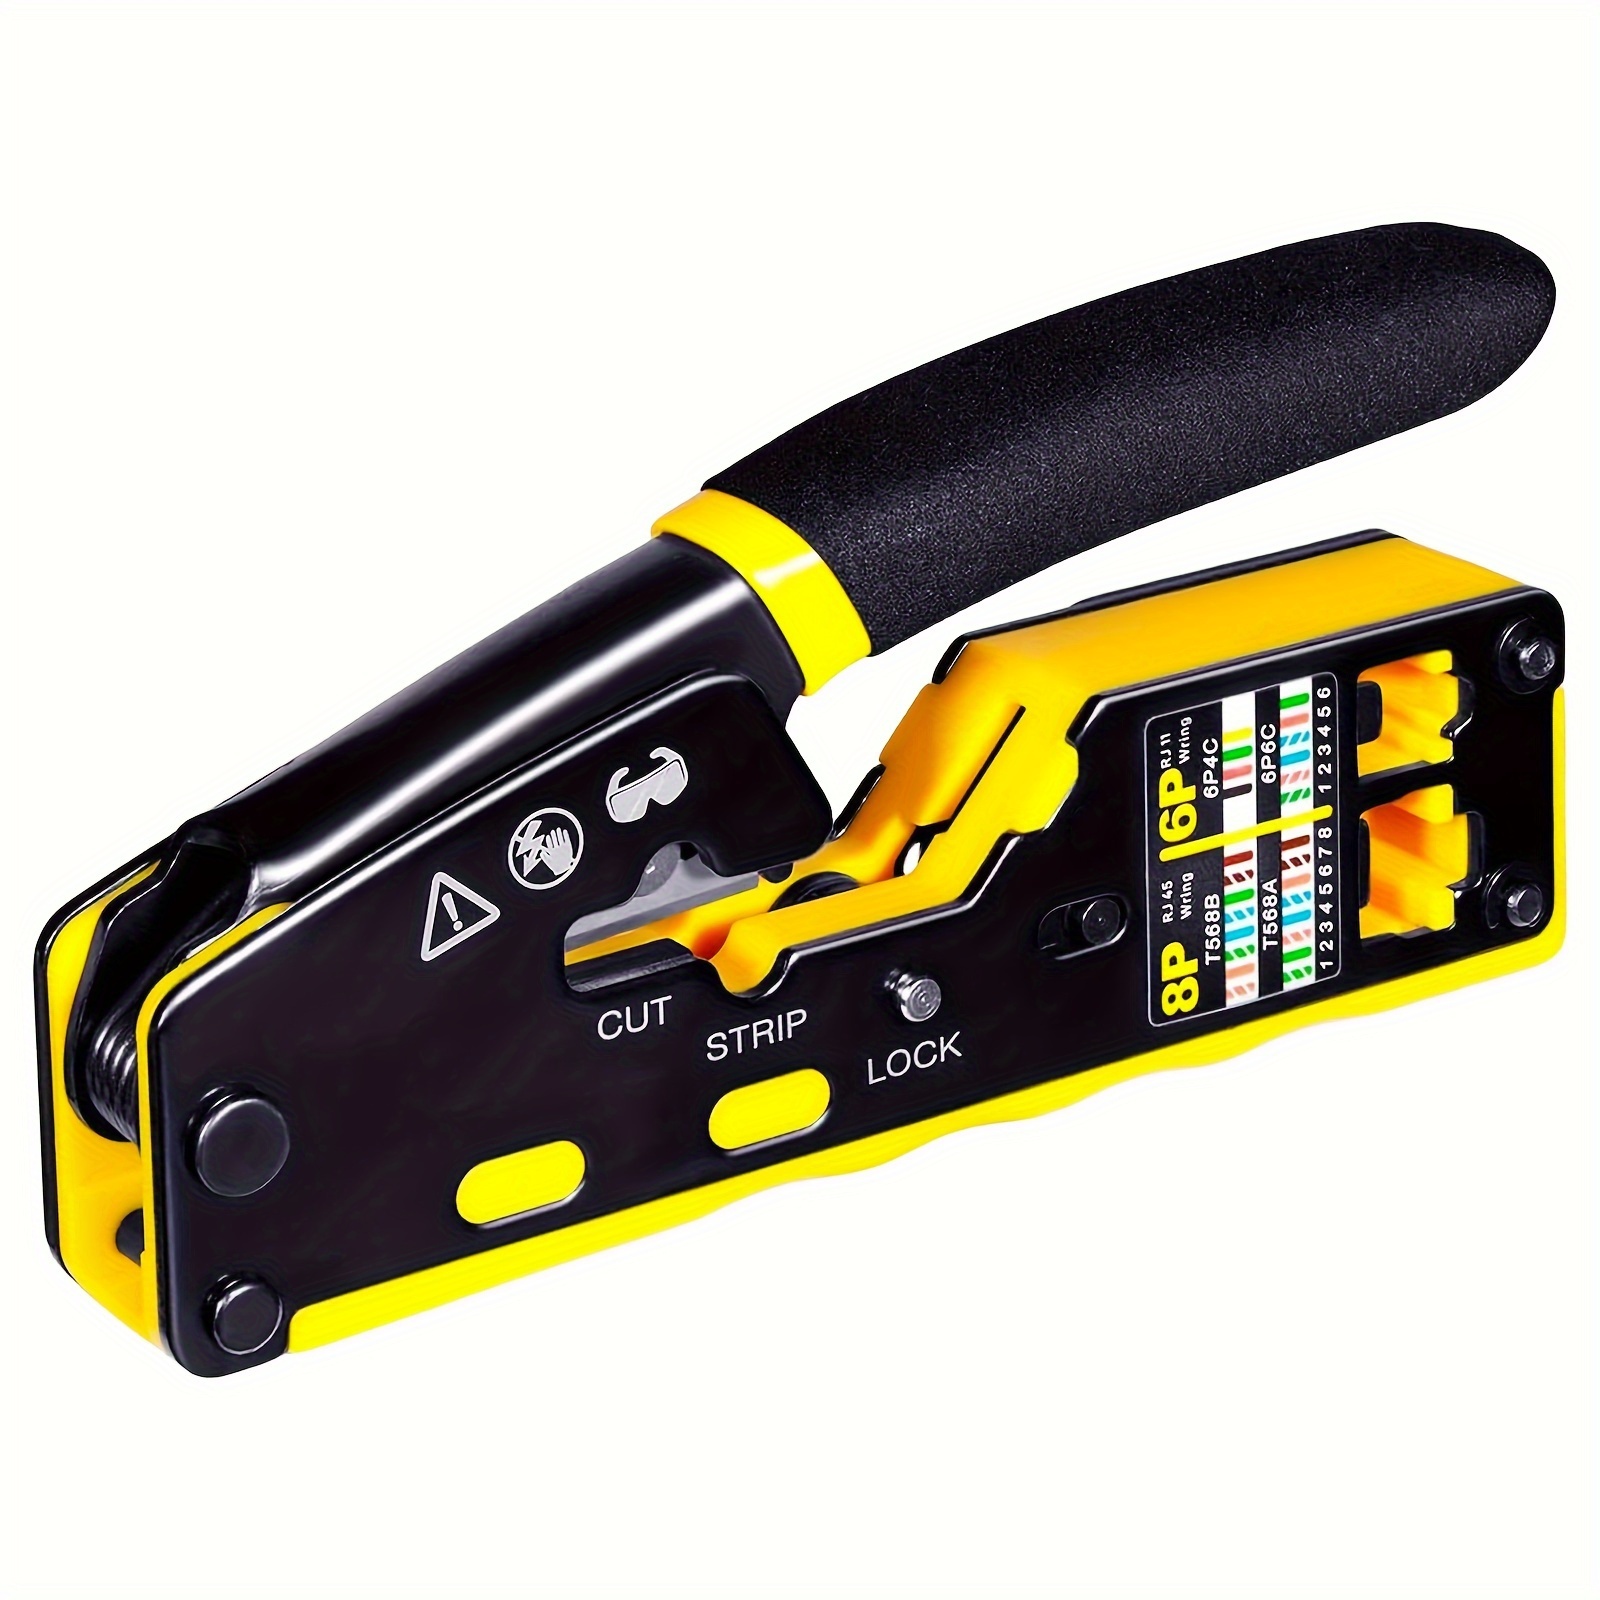 

Professional Rj45 Ethernet Crimping Tool Kit - Durable Steel, Black | All-in-one Cat5/cat6/cat7/cat8 Wire Stripper & Cutter With Network Cable Tester For Rj11/12 6p/8p